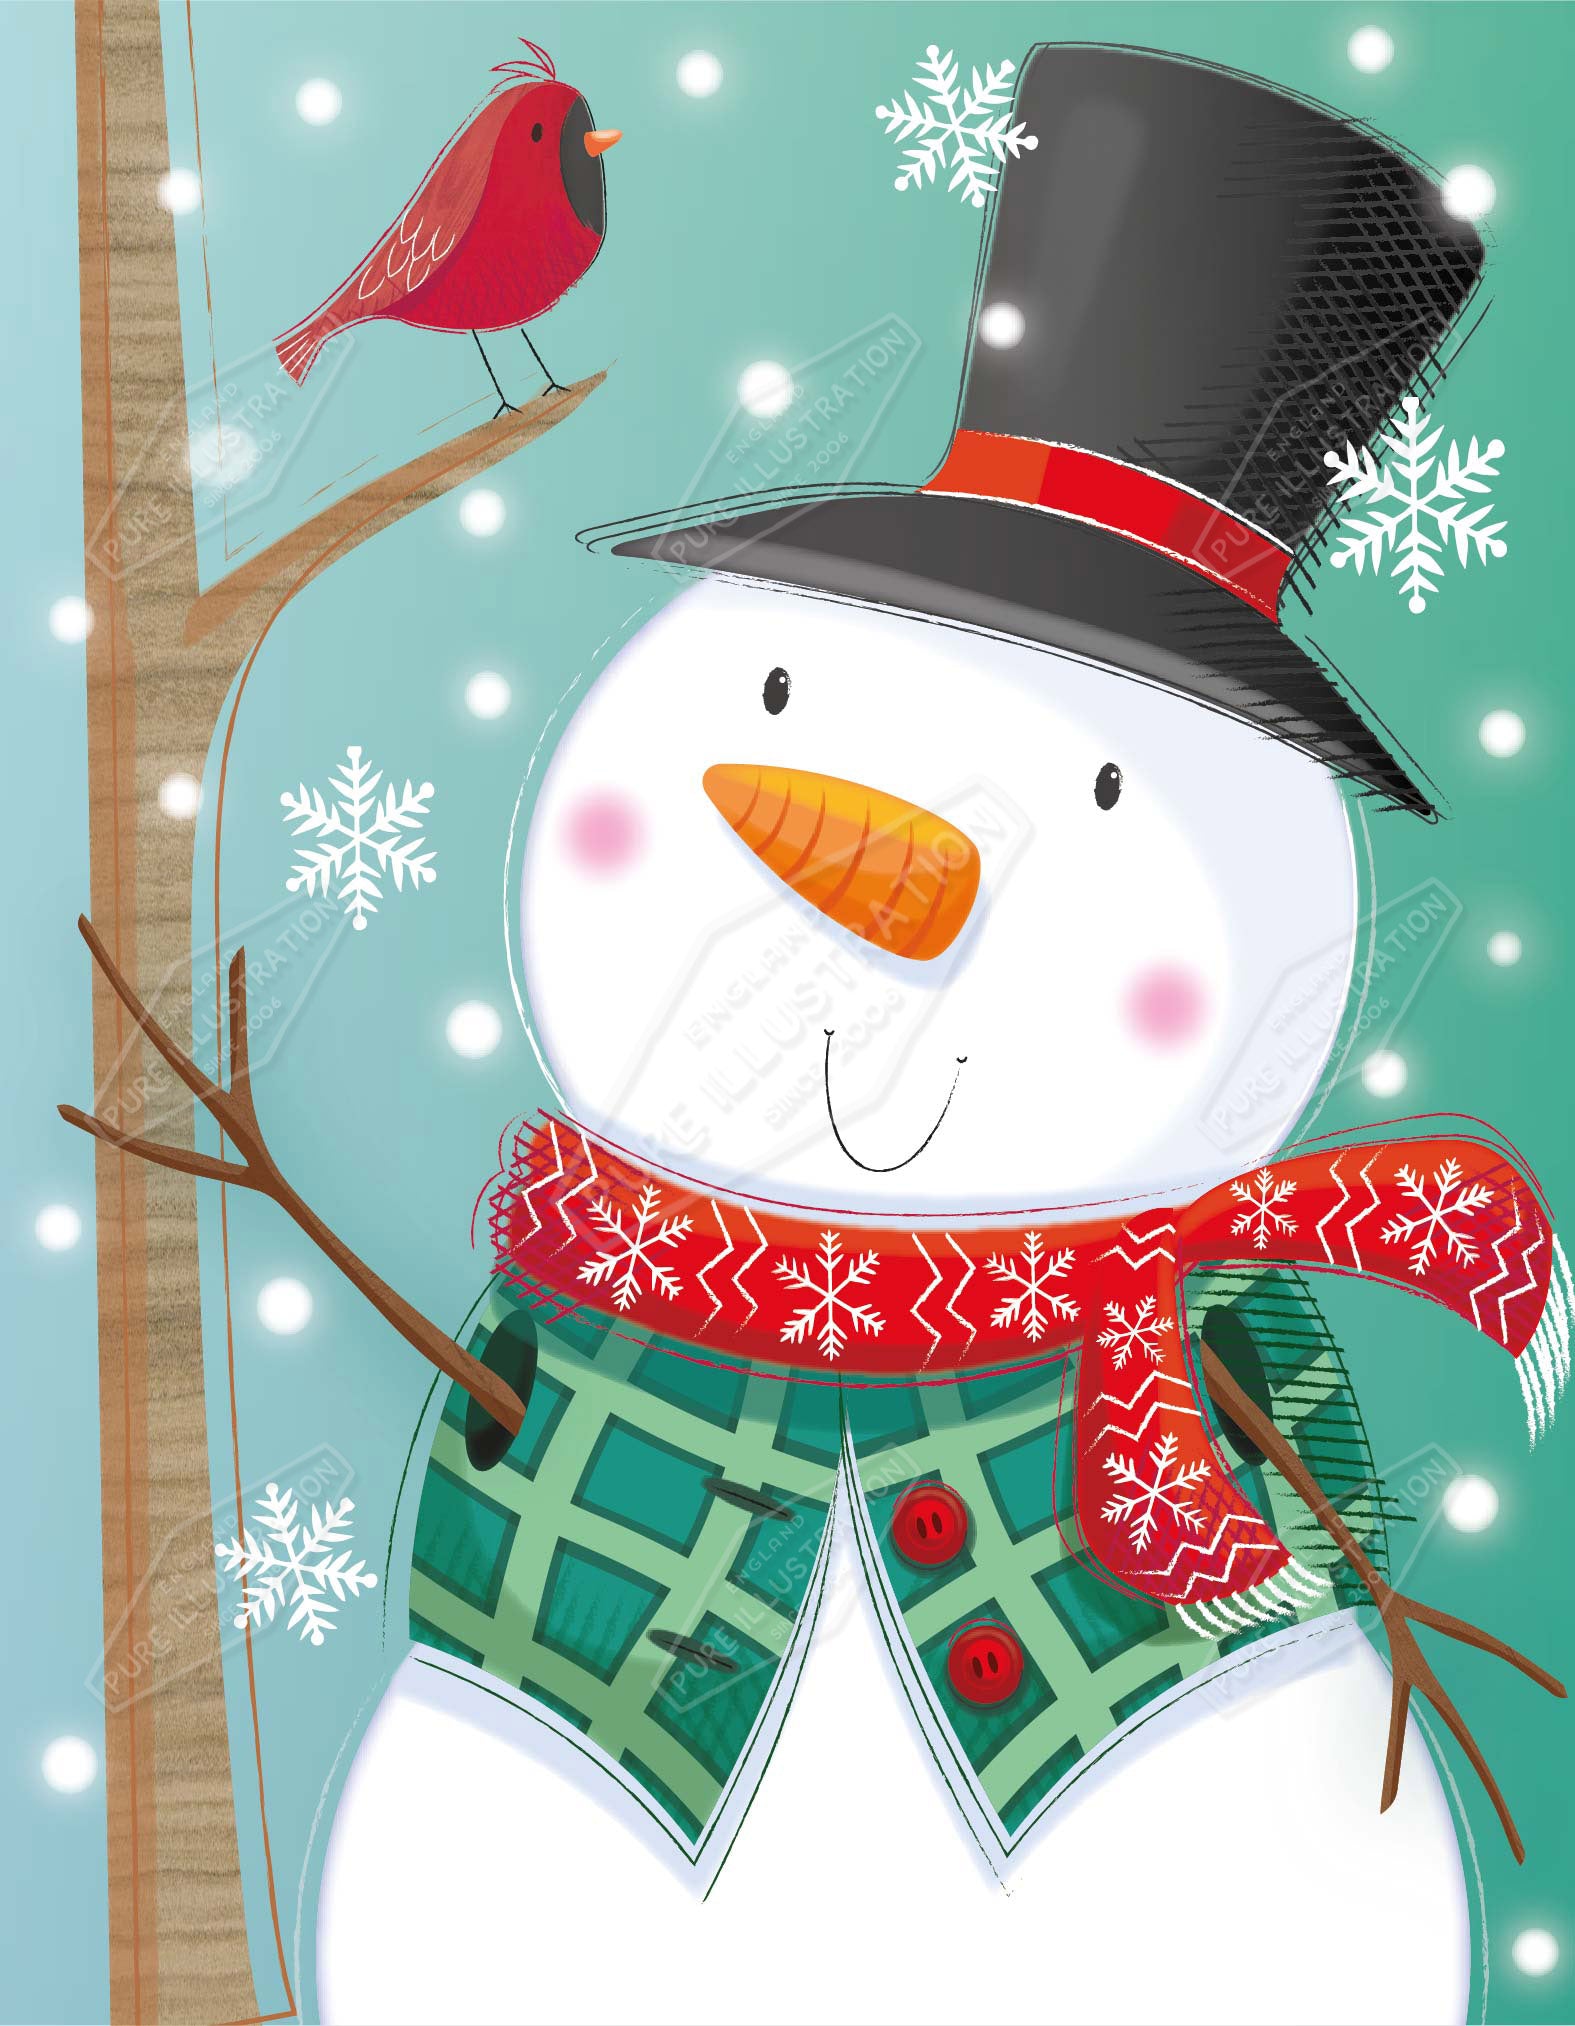 00035244SPI- Sarah Pitt is represented by Pure Art Licensing Agency - Christmas Greeting Card Design